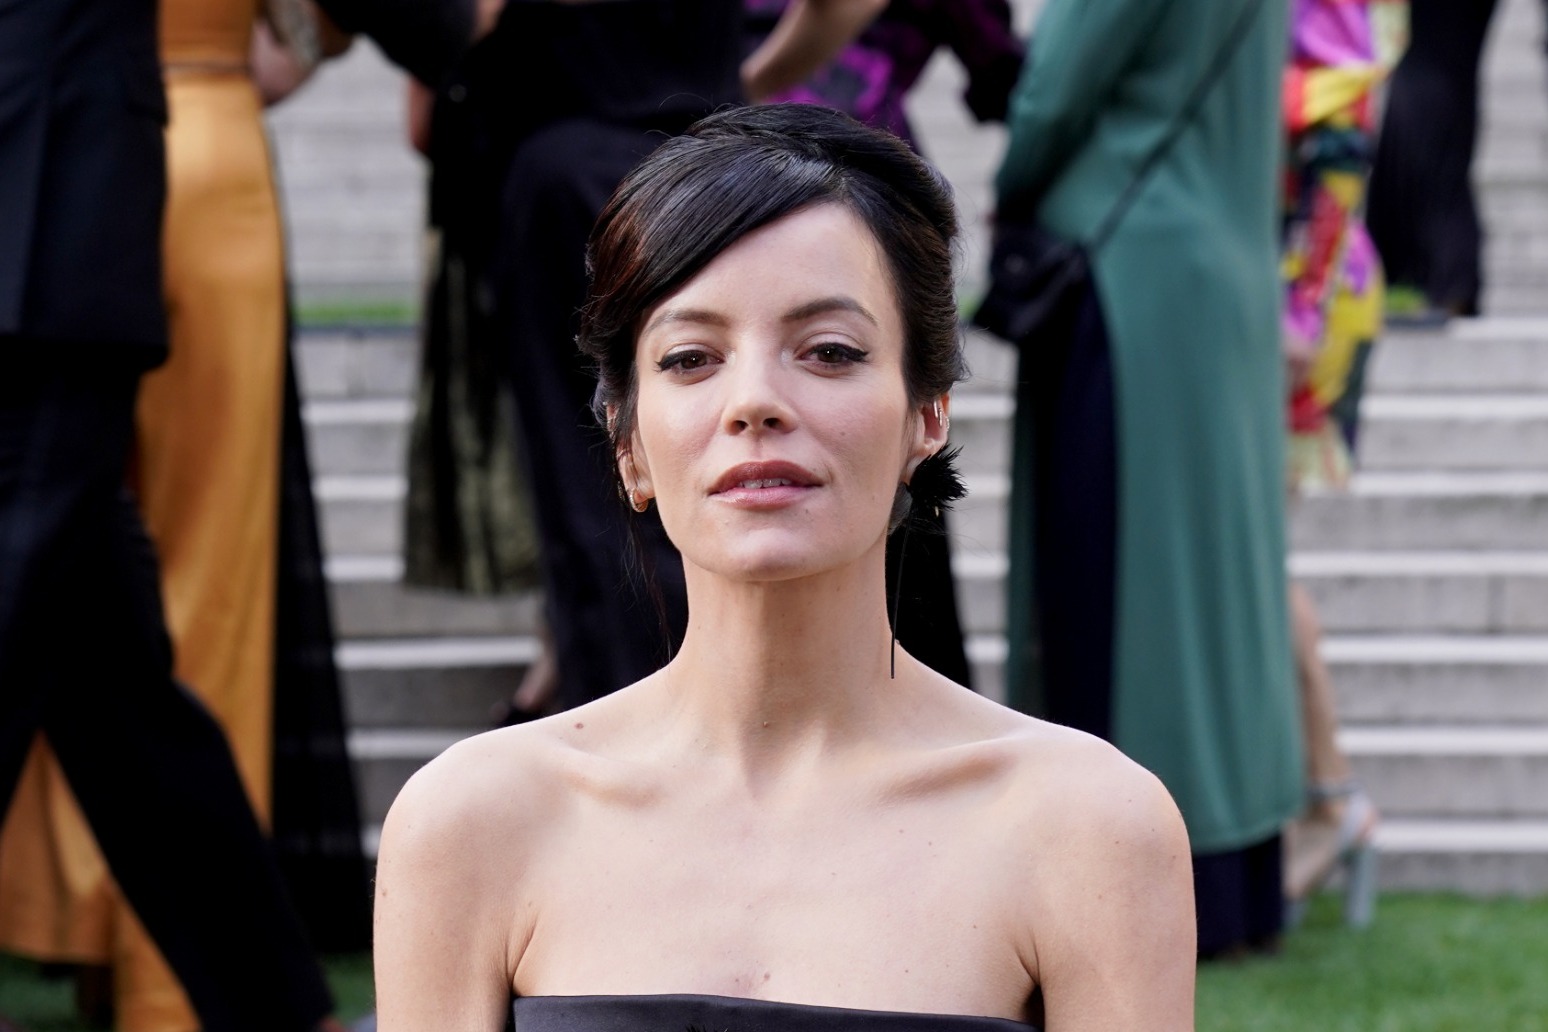 Lily Allen: Women should not have to justify having an abortion 